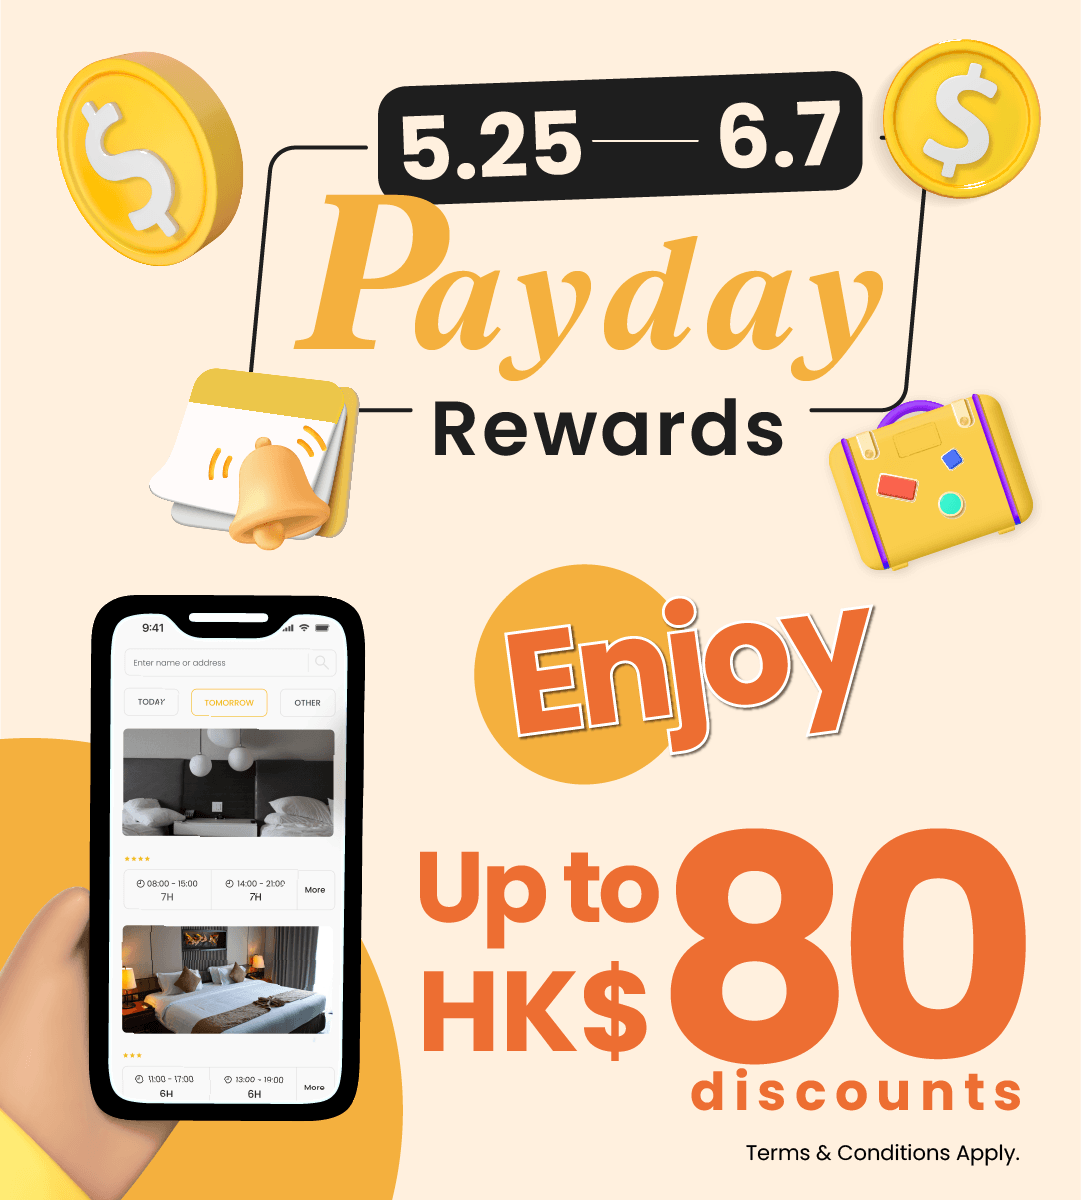 Pay Day Rewards: Celebrate your hard work with instant discount